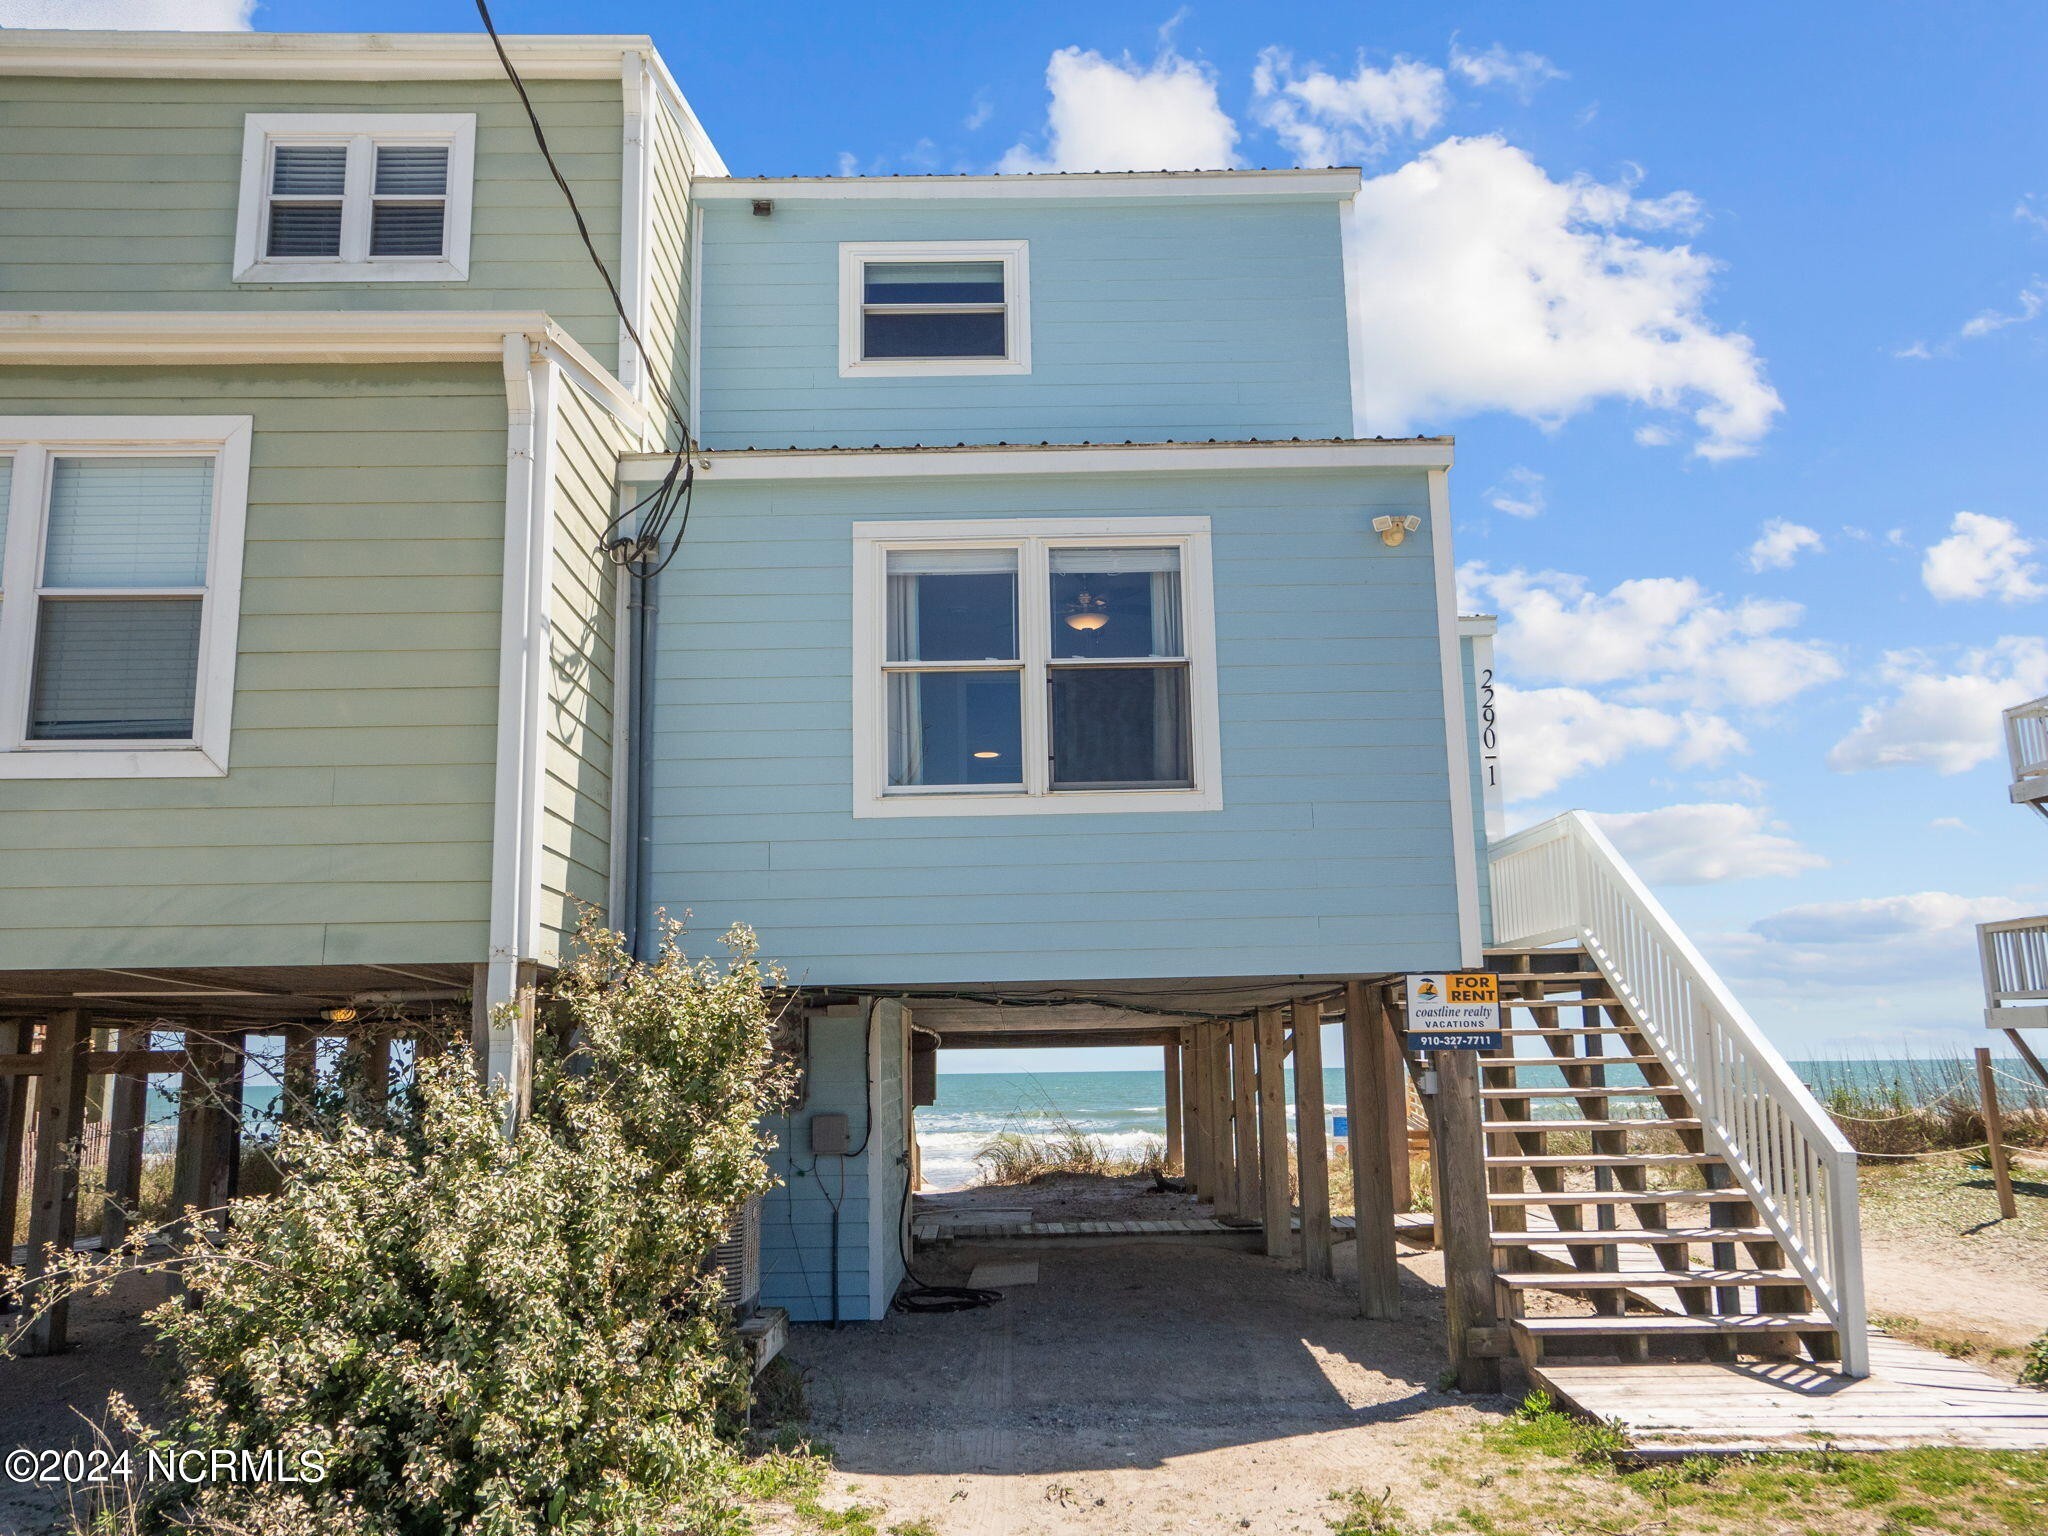 2. 2290 New River Inlet Road